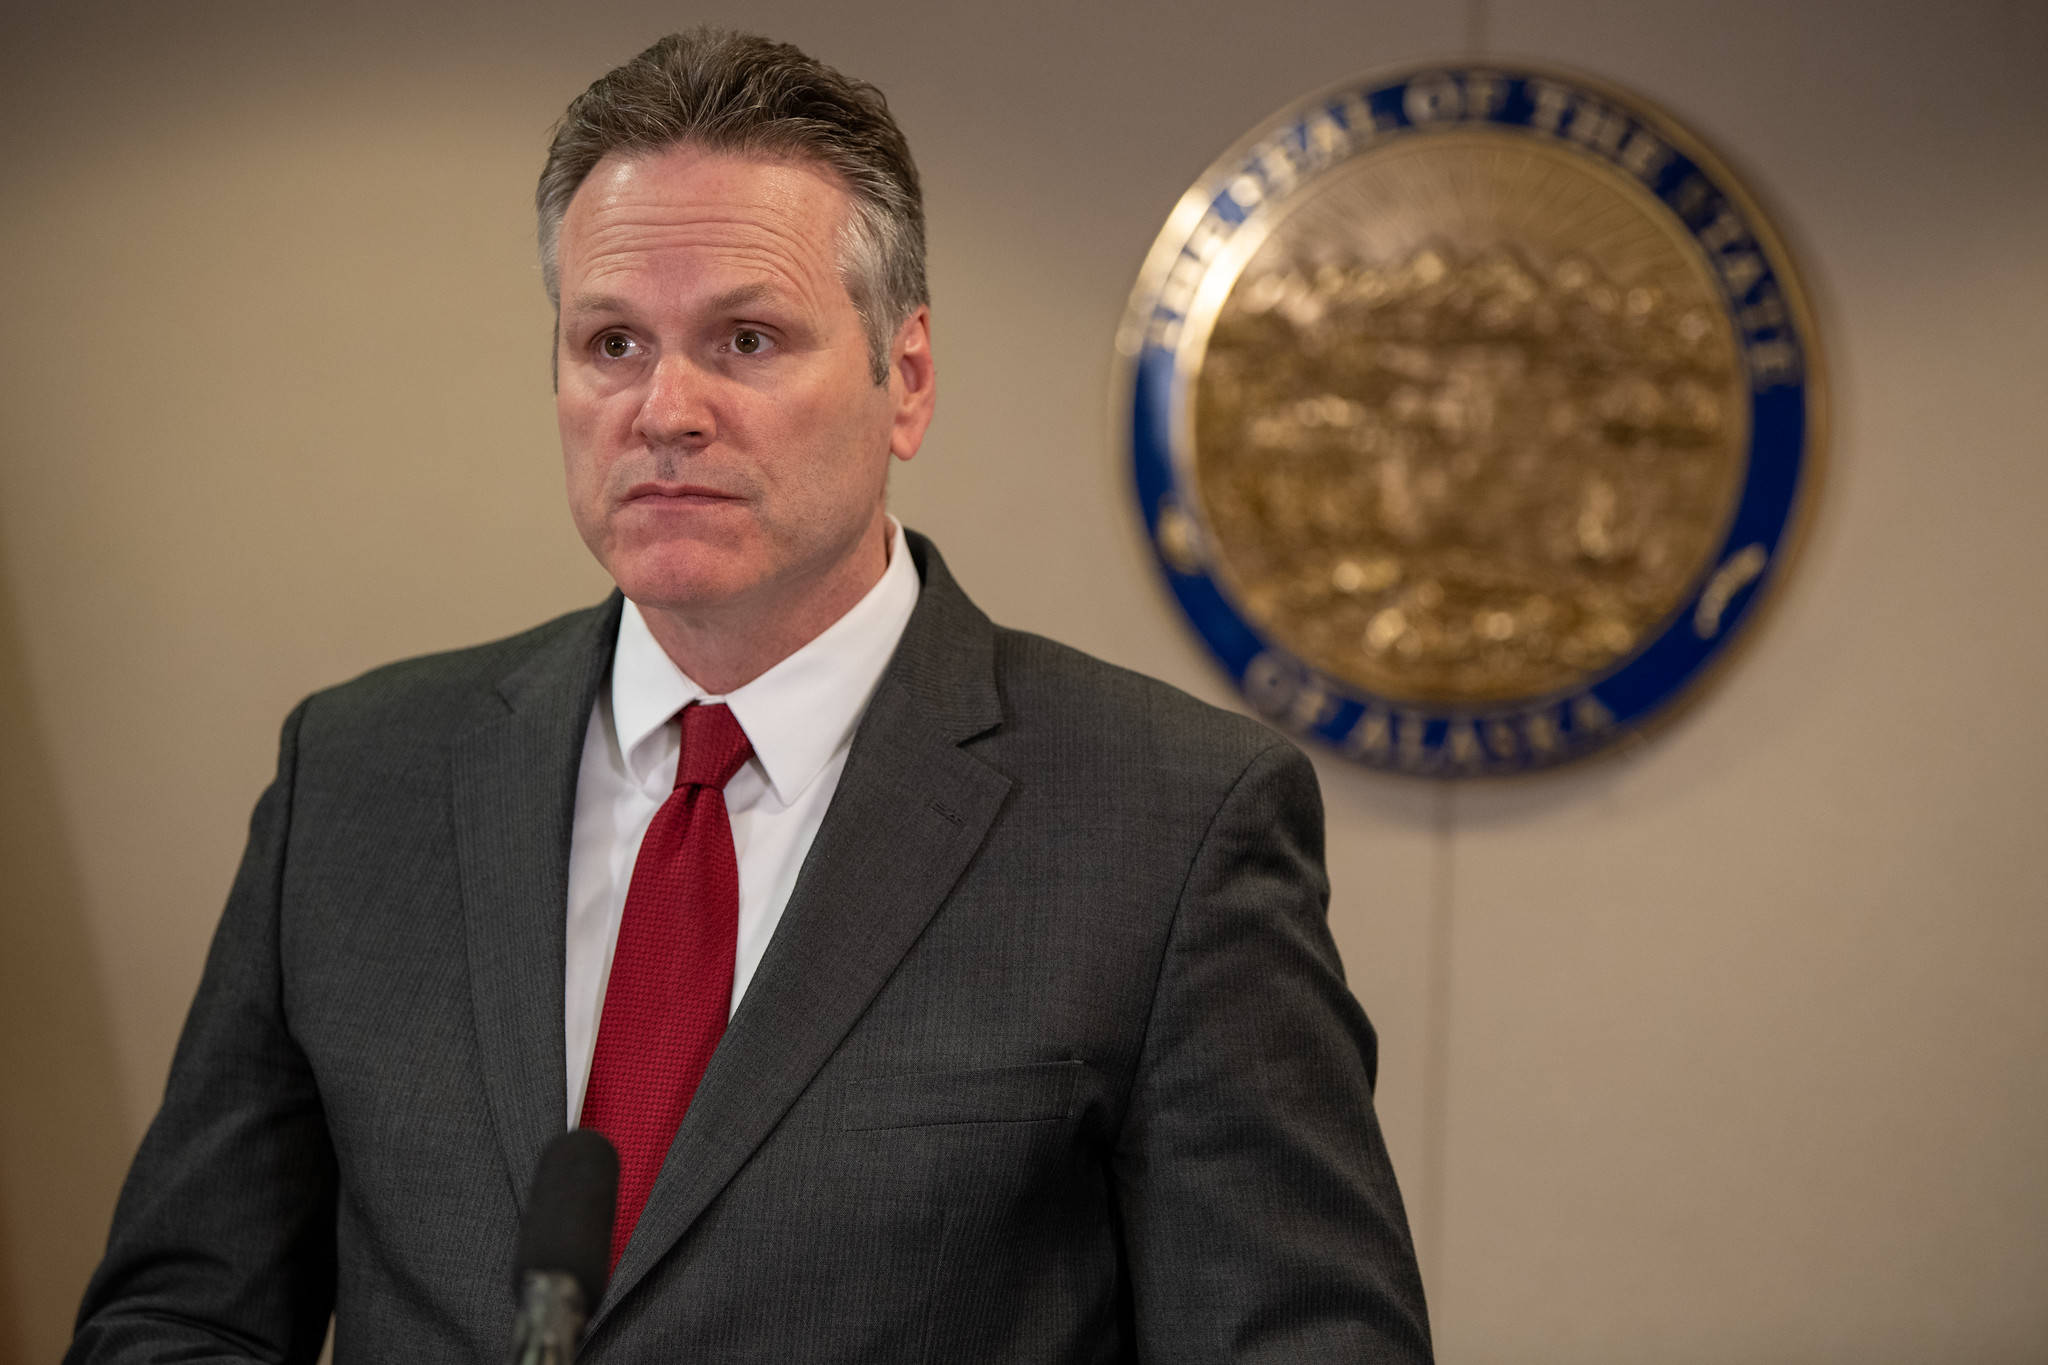 Gov. Mike Dunleavy at a press conference in Anchorage on Friday, March 20, 2020. (Courtesy photo | Office of Gov. Mike Dunleavy)